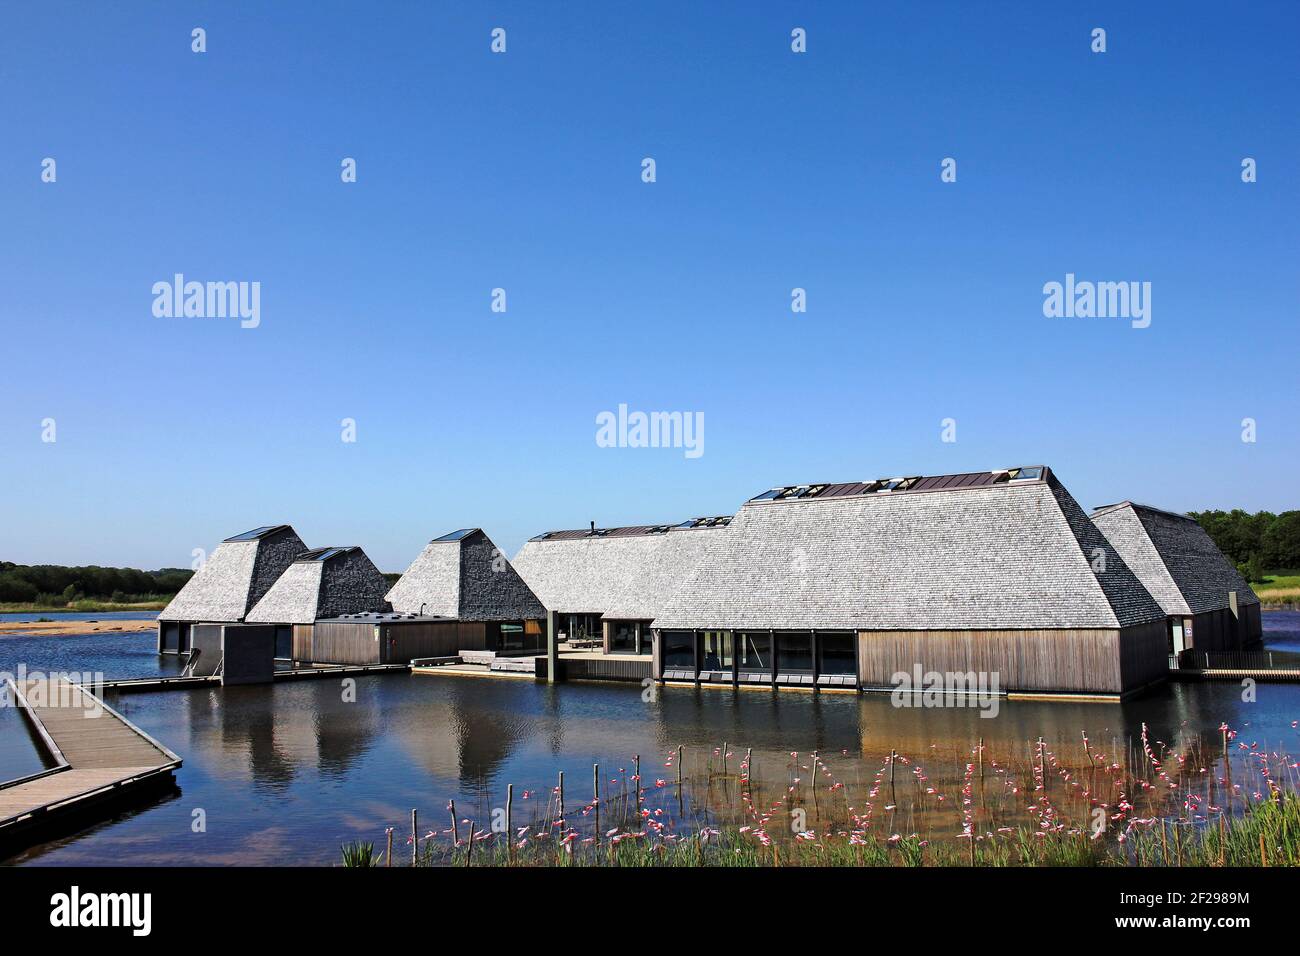 Brockholes Nature Reserve near Preston, Lancashire. Owned and managed by the Wildlife Trust for Lancashire, Manchester and North Merseyside. Stock Photo